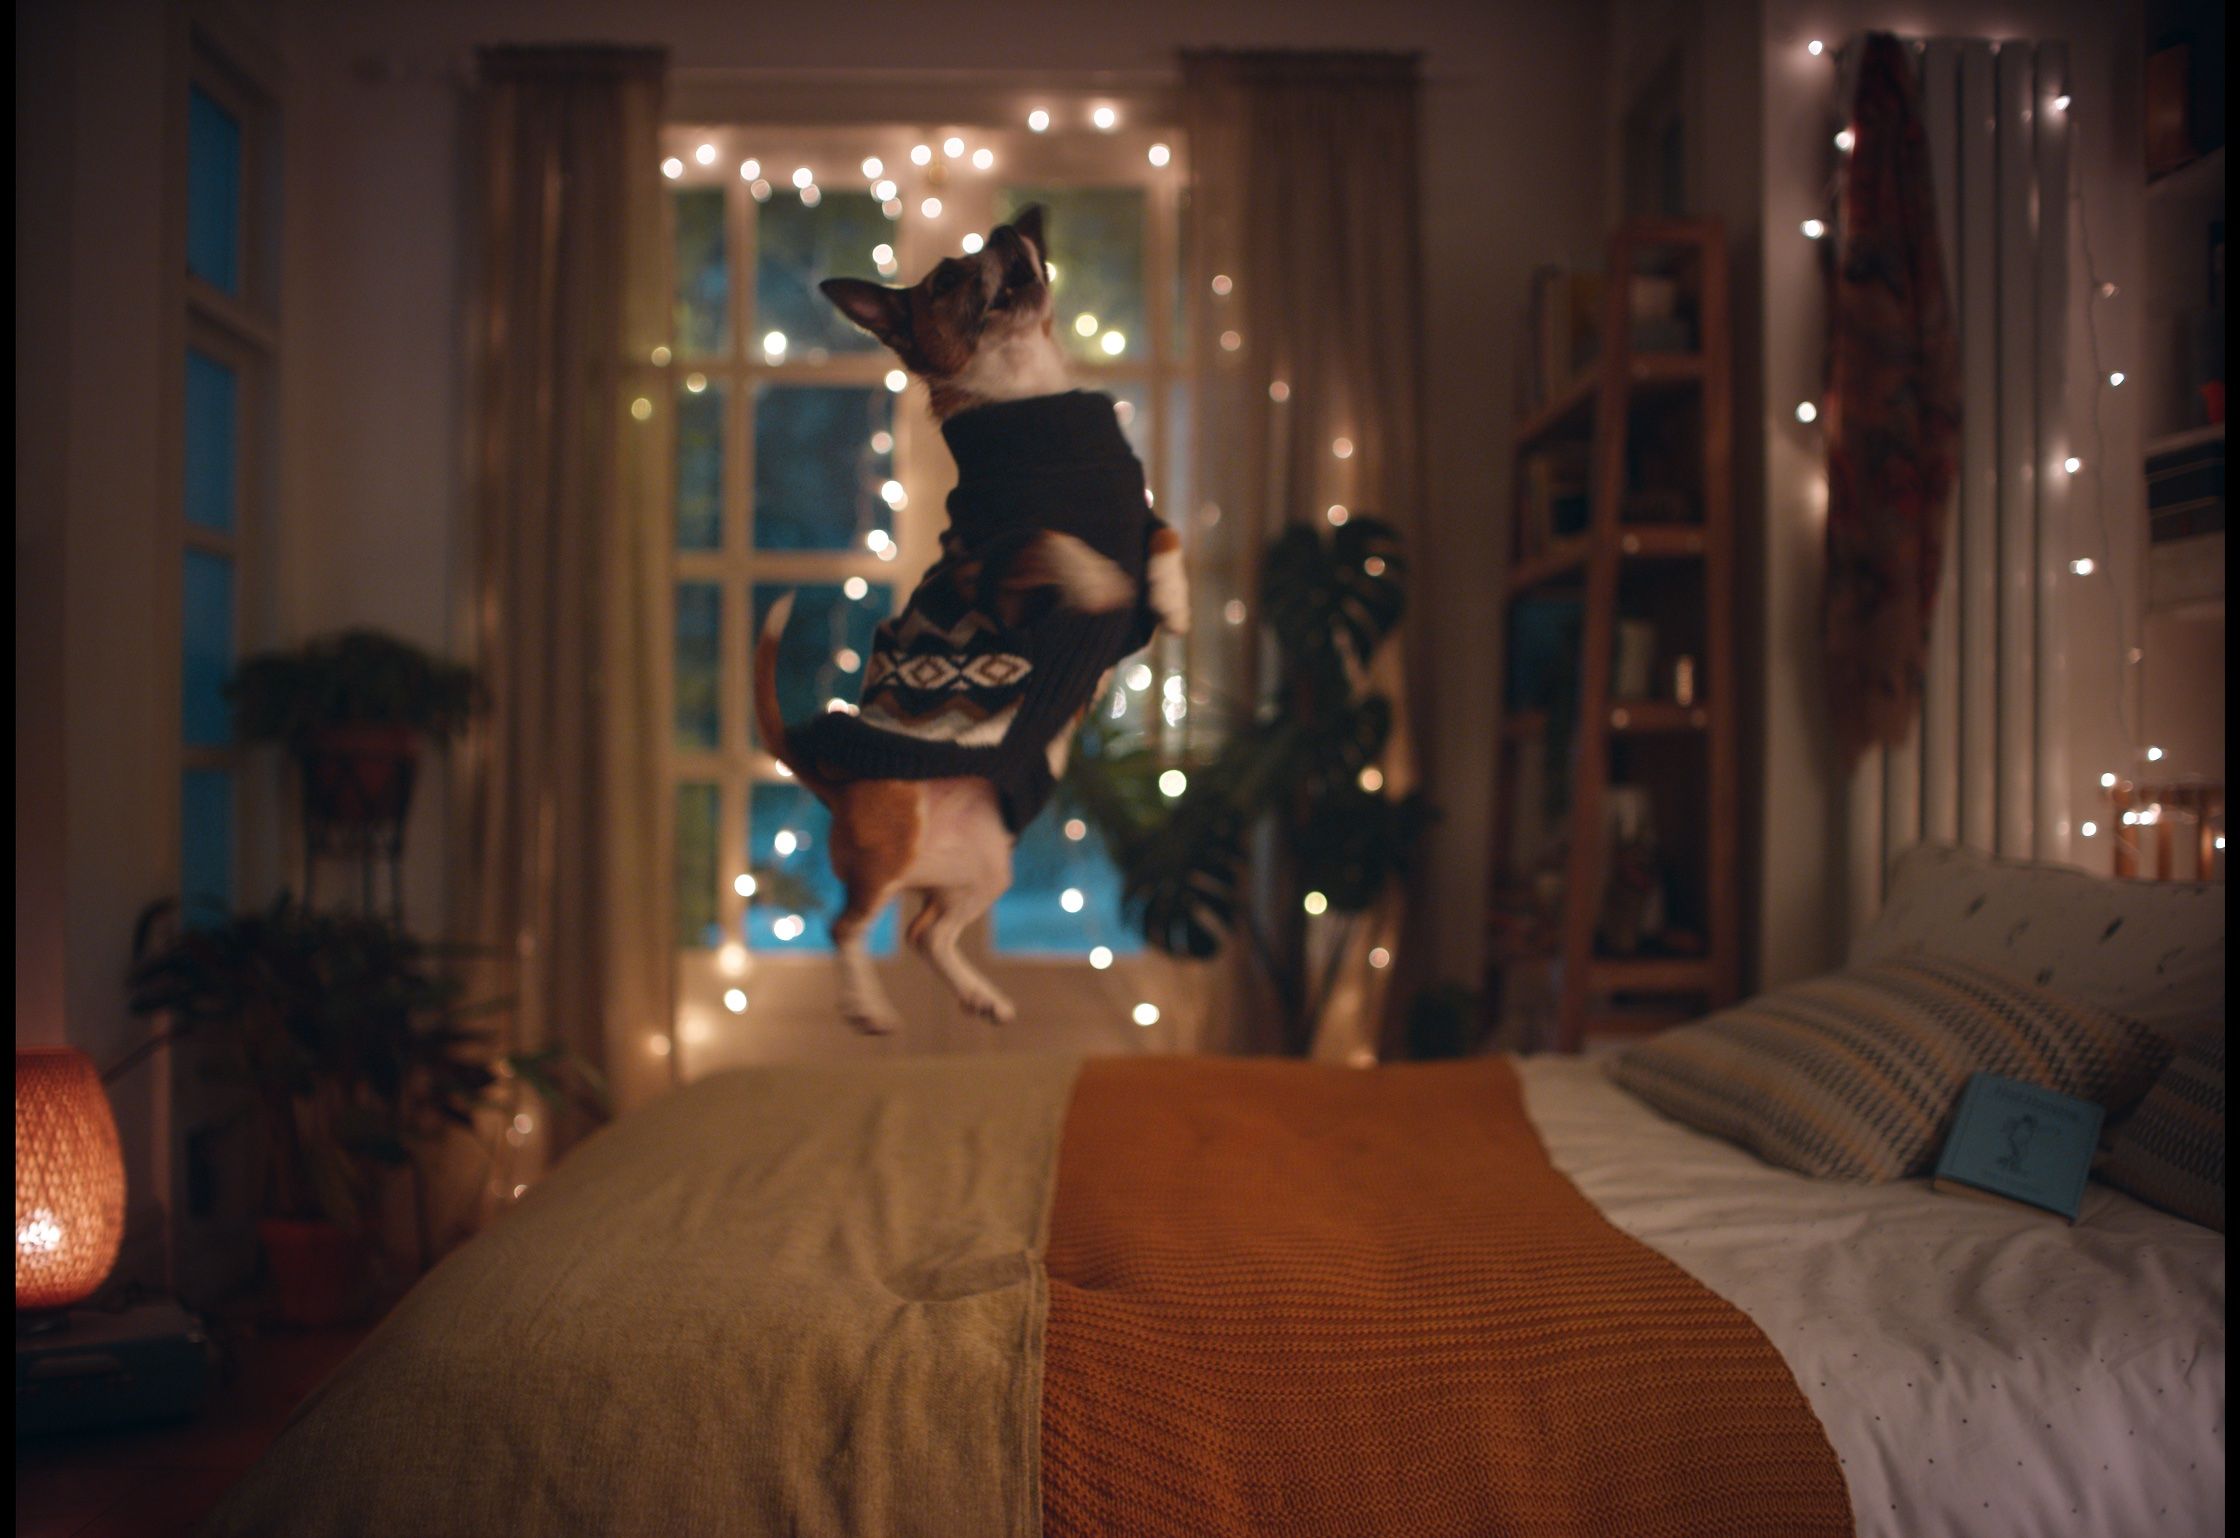 Go Pyjamas M S Launches New Christmas Advert And We Re Hooked Again